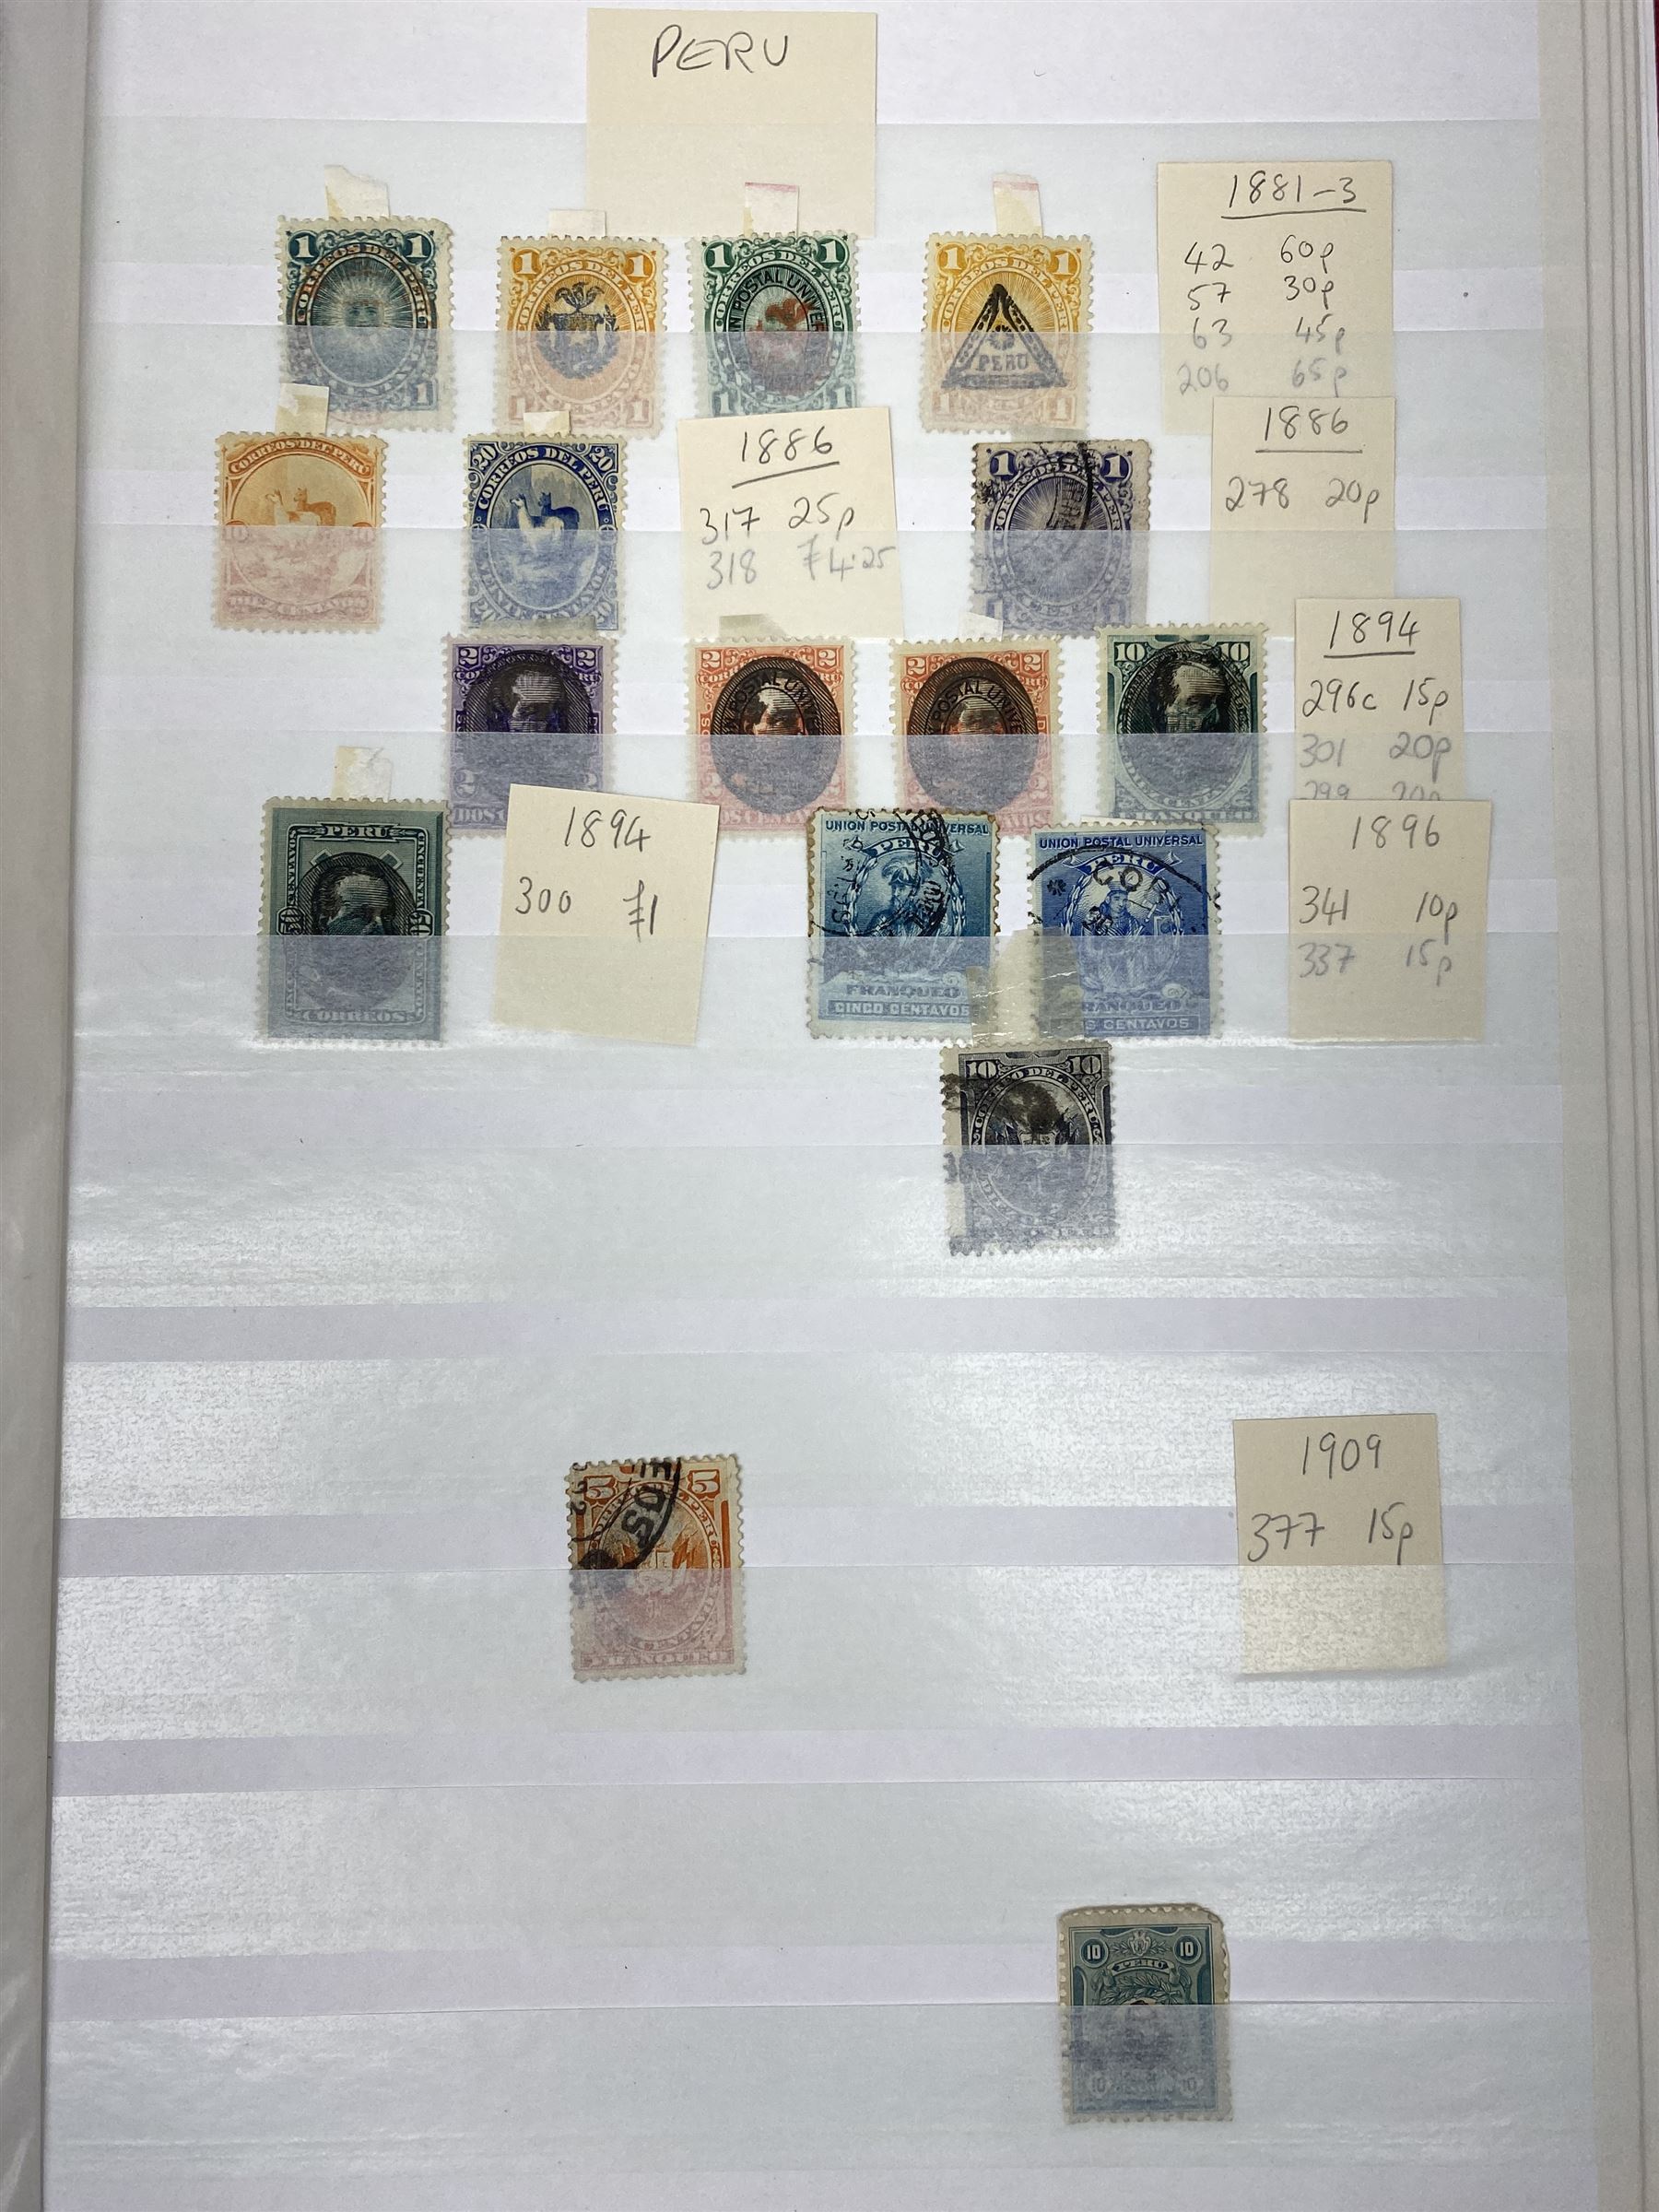 World stamps - Image 15 of 15